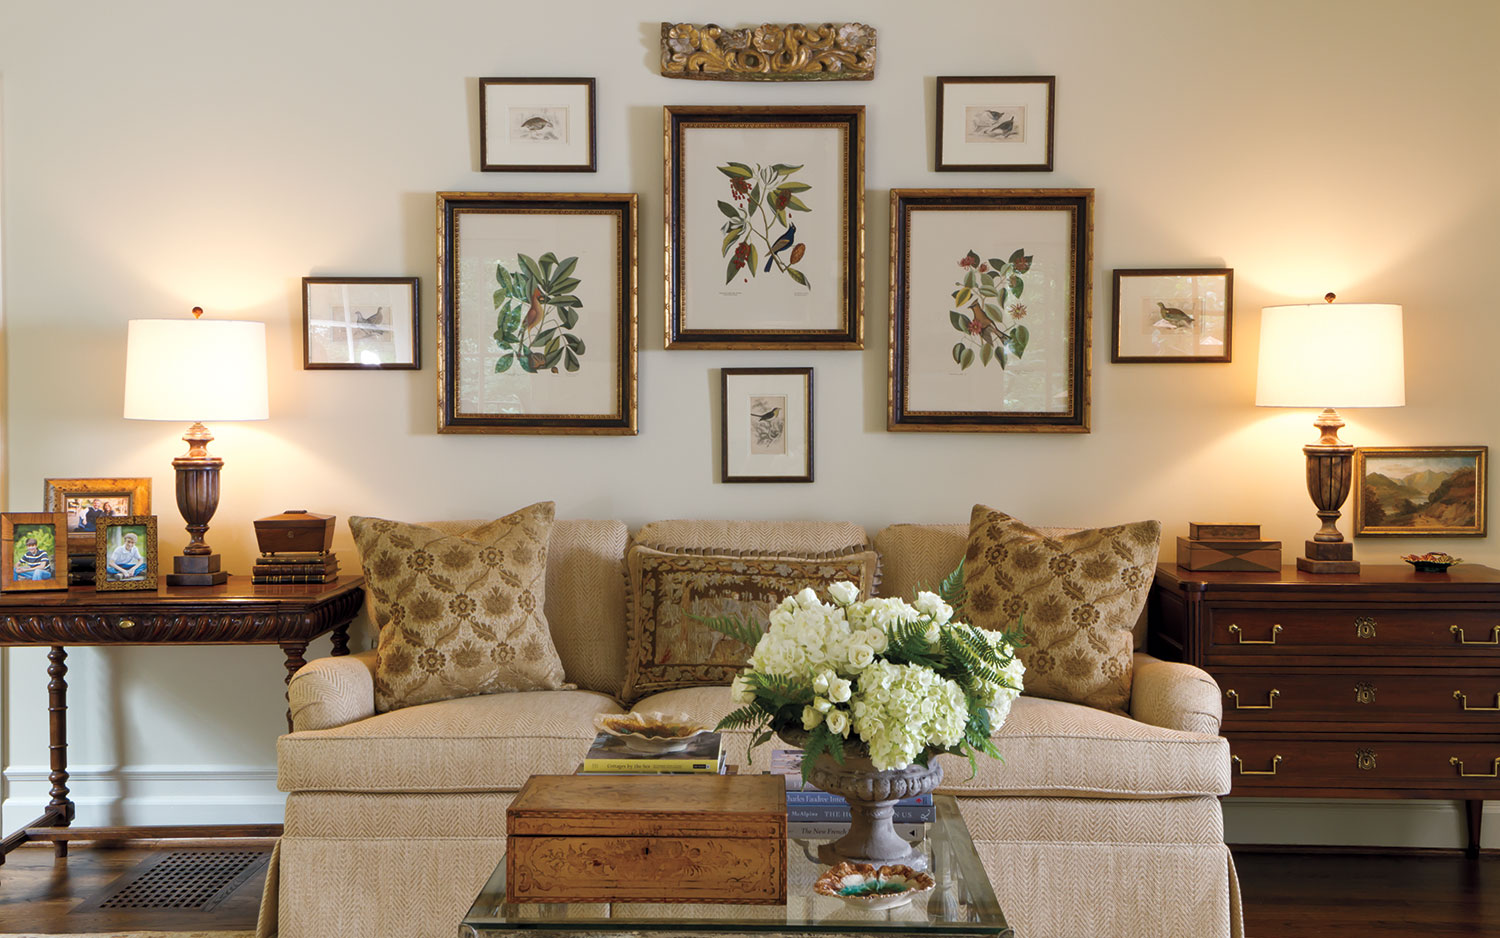 A picture of a formal living room wall grouping